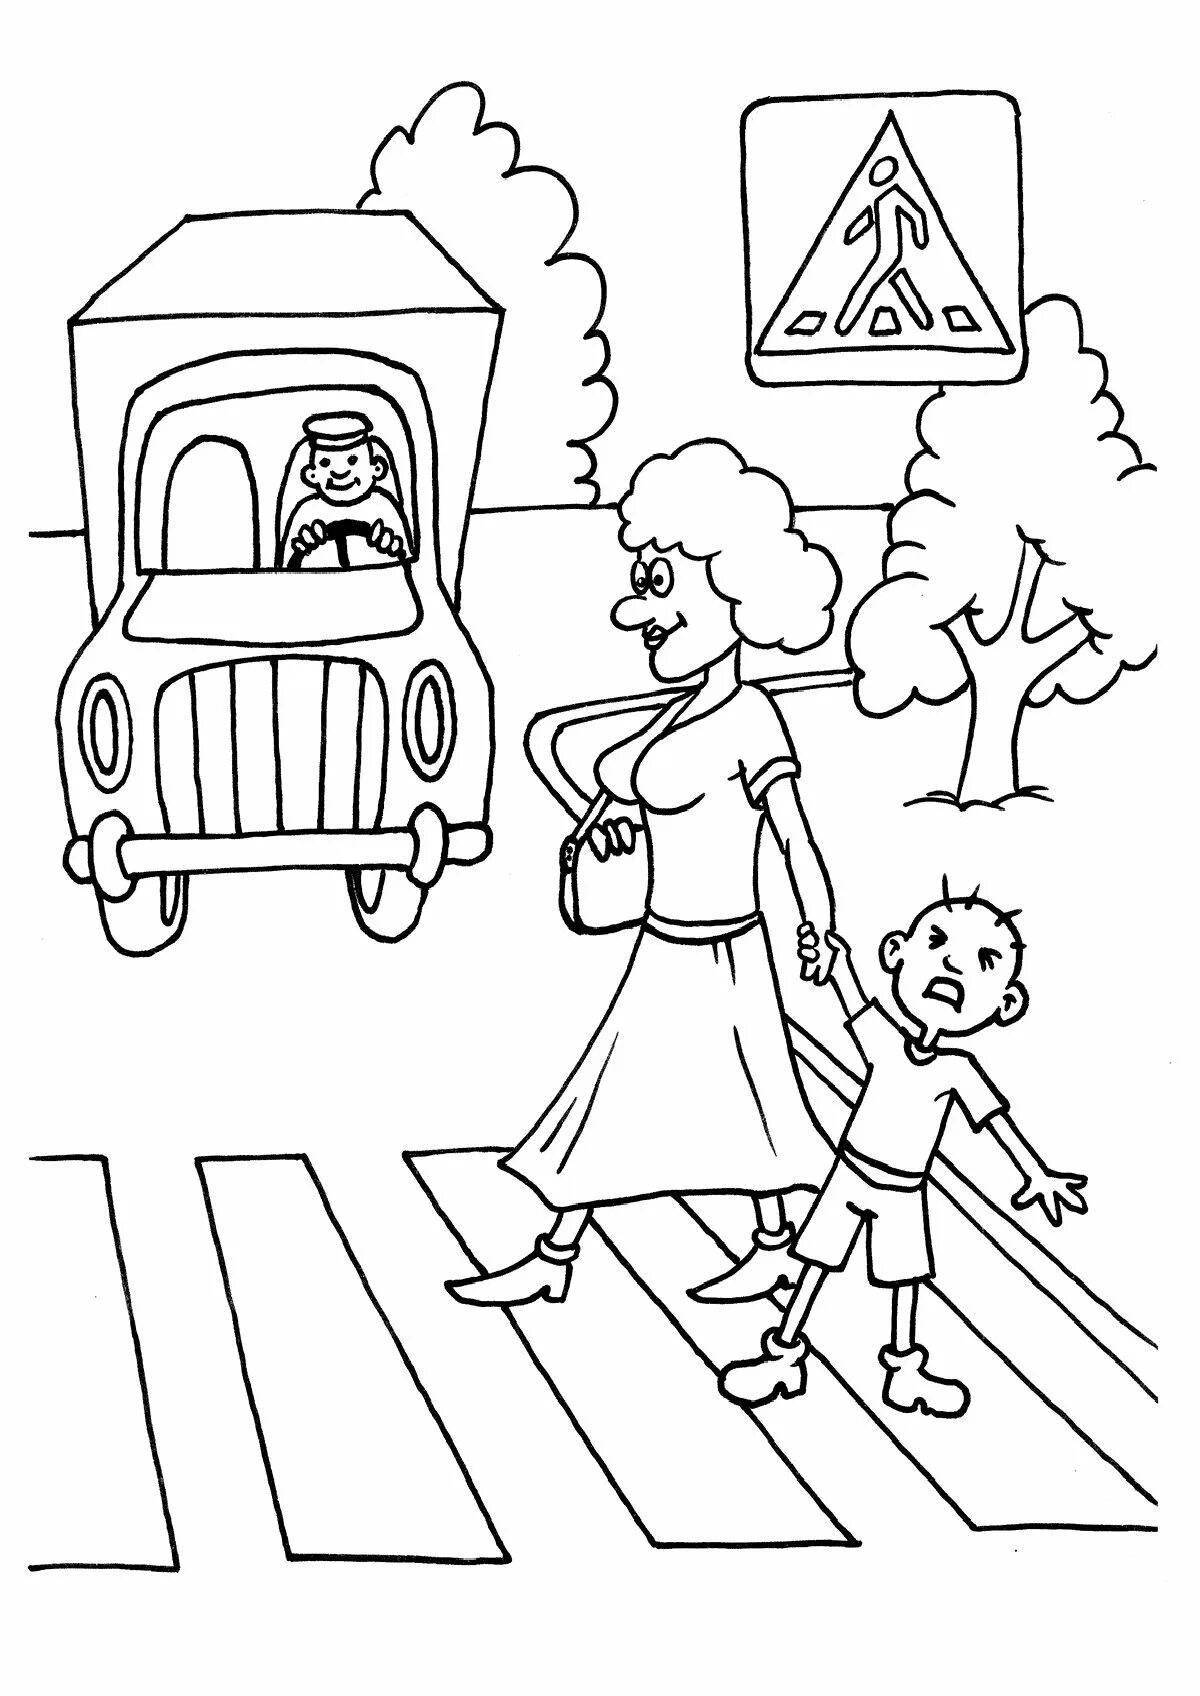 Drawings for kids traffic rules for kids #4